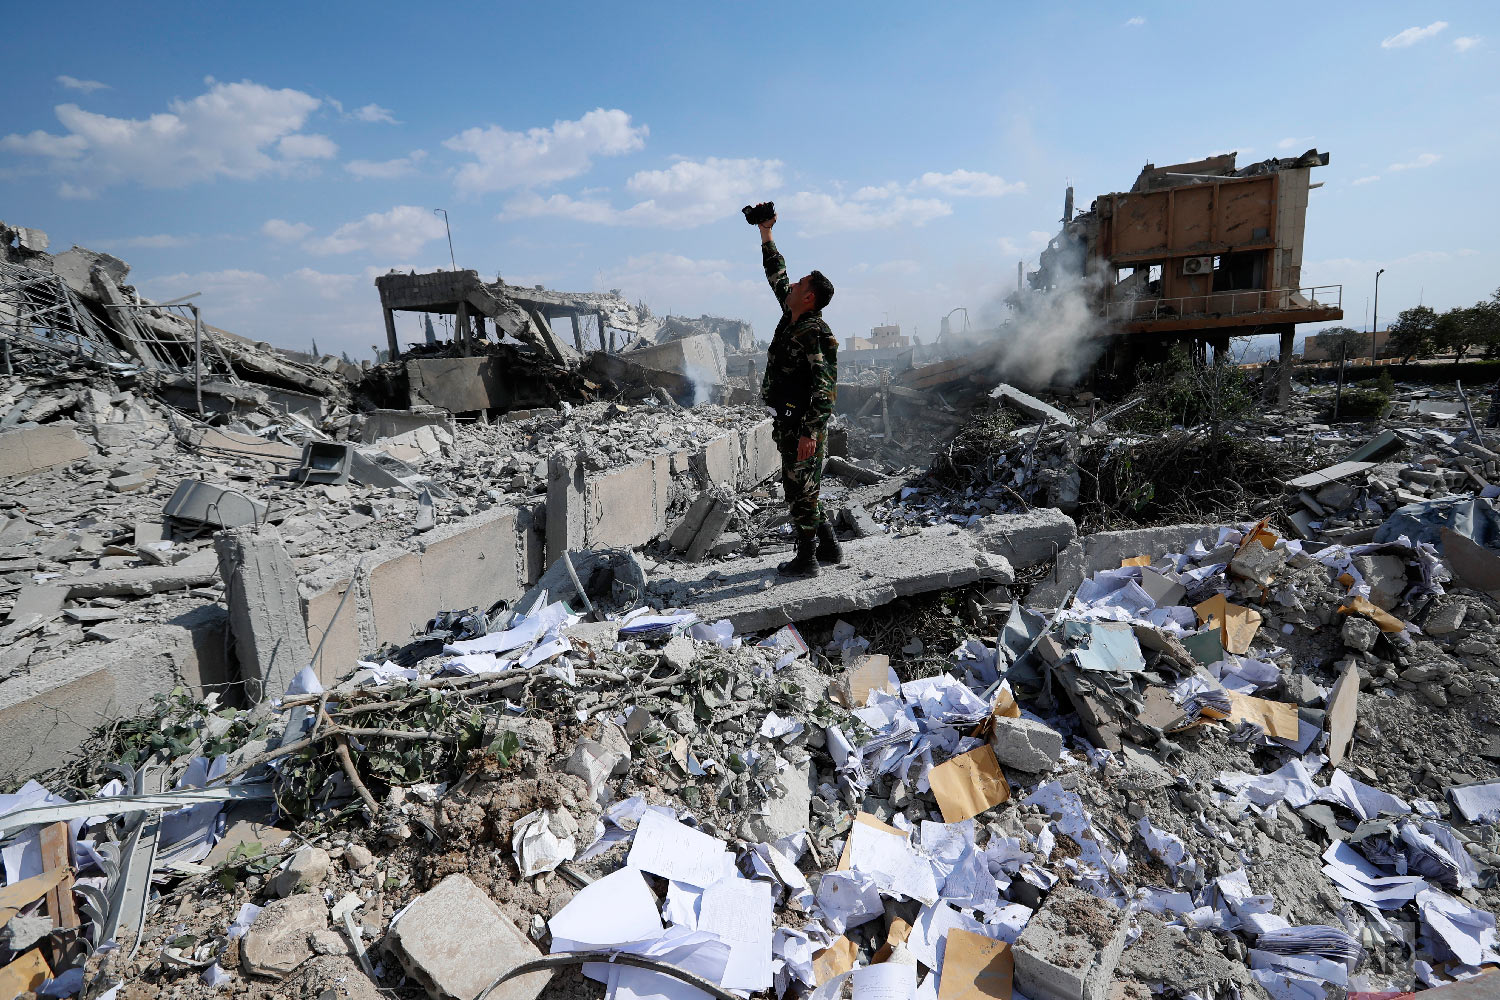  A Syrian soldier films the wreckage of the Syrian Scientific Research Center, which was attacked by U.S., British and French military strikes to punish President Bashar Assad for a suspected chemical attack against civilians, in the Damascus suburb 